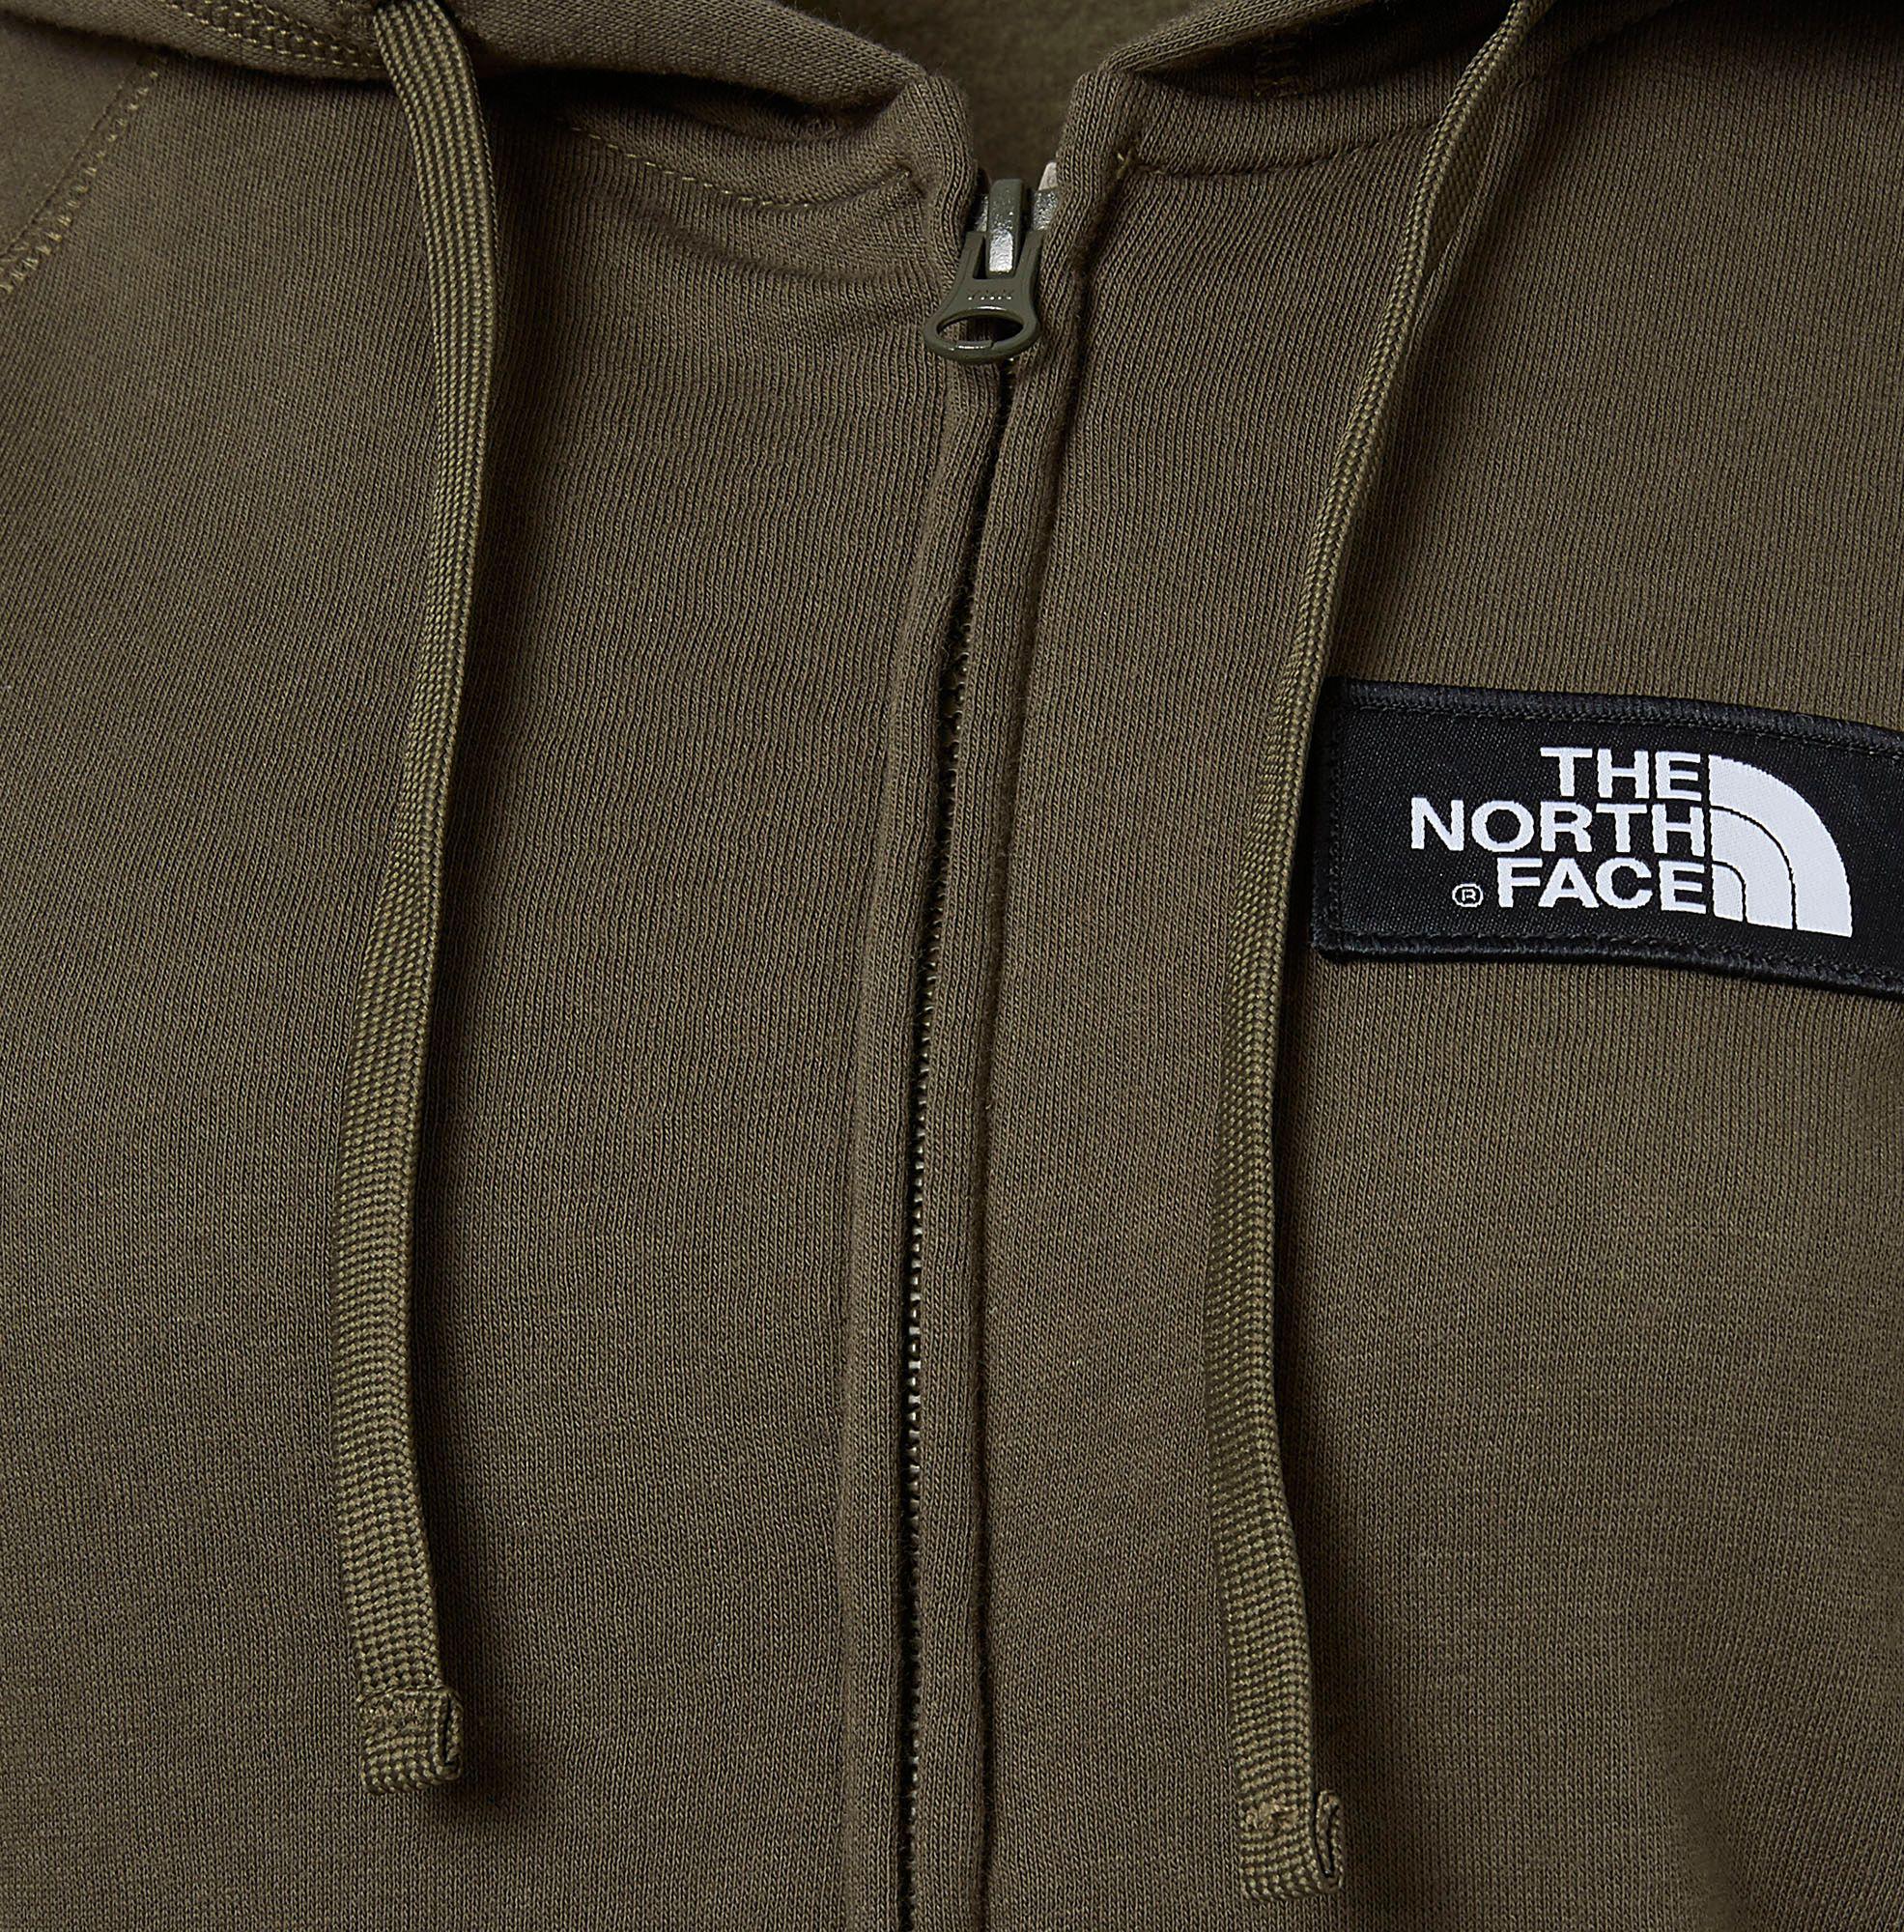 mens green north face hoodie